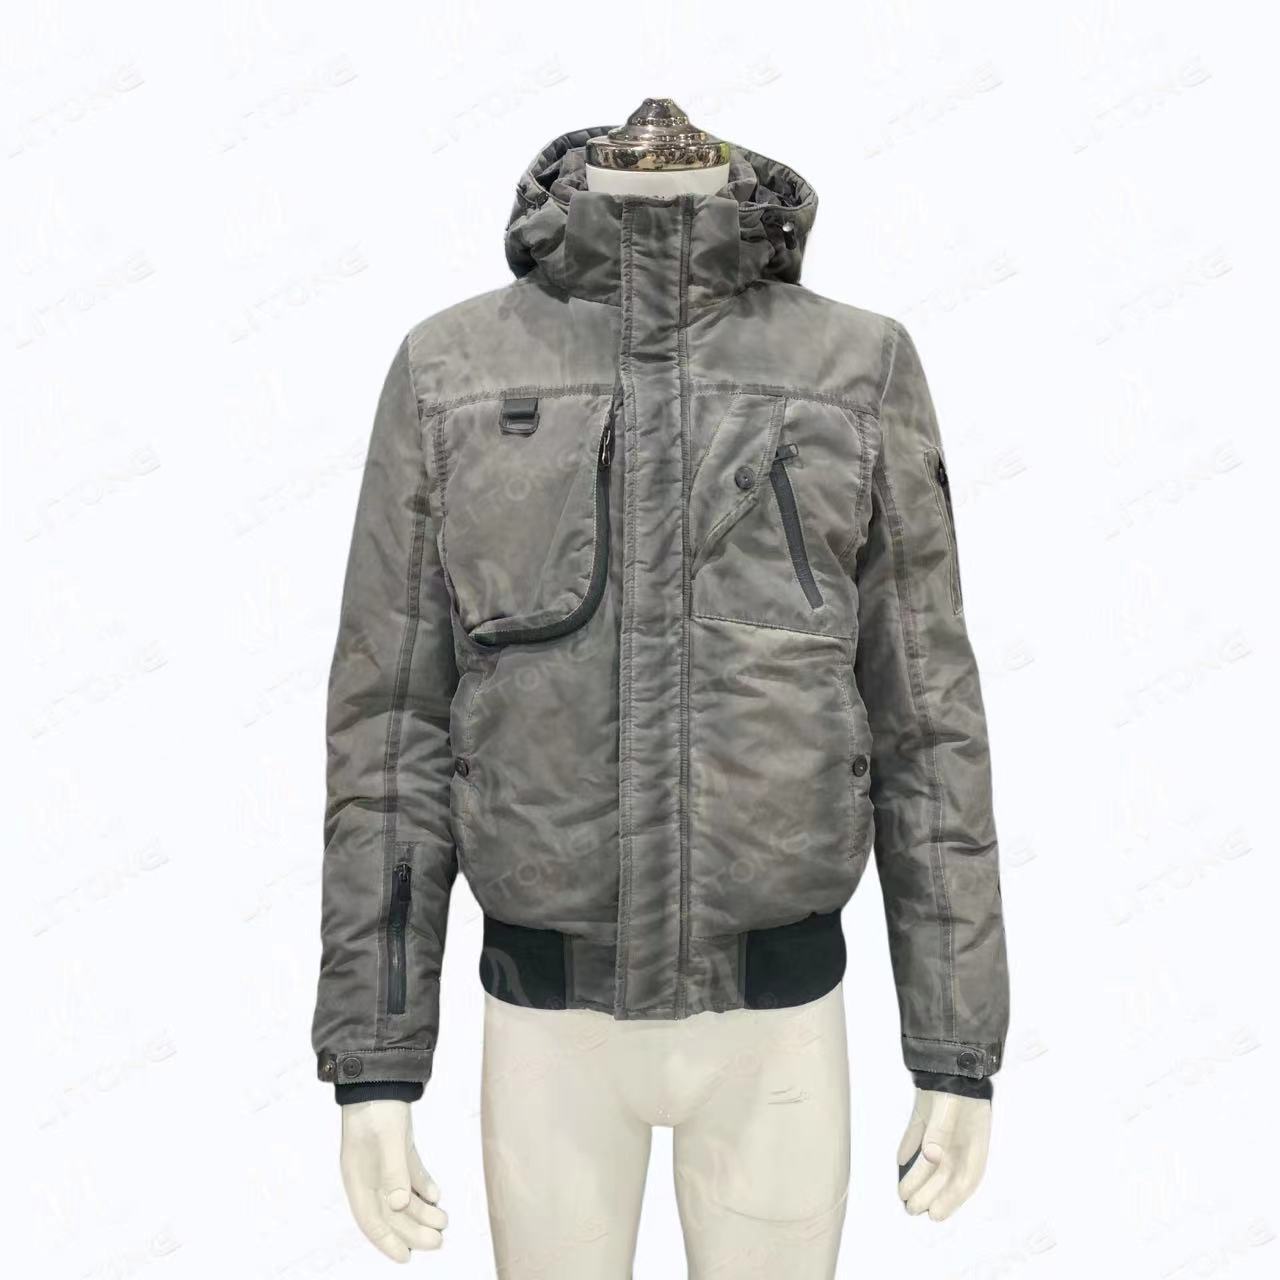 Men's winter jacket with faded garment washing.